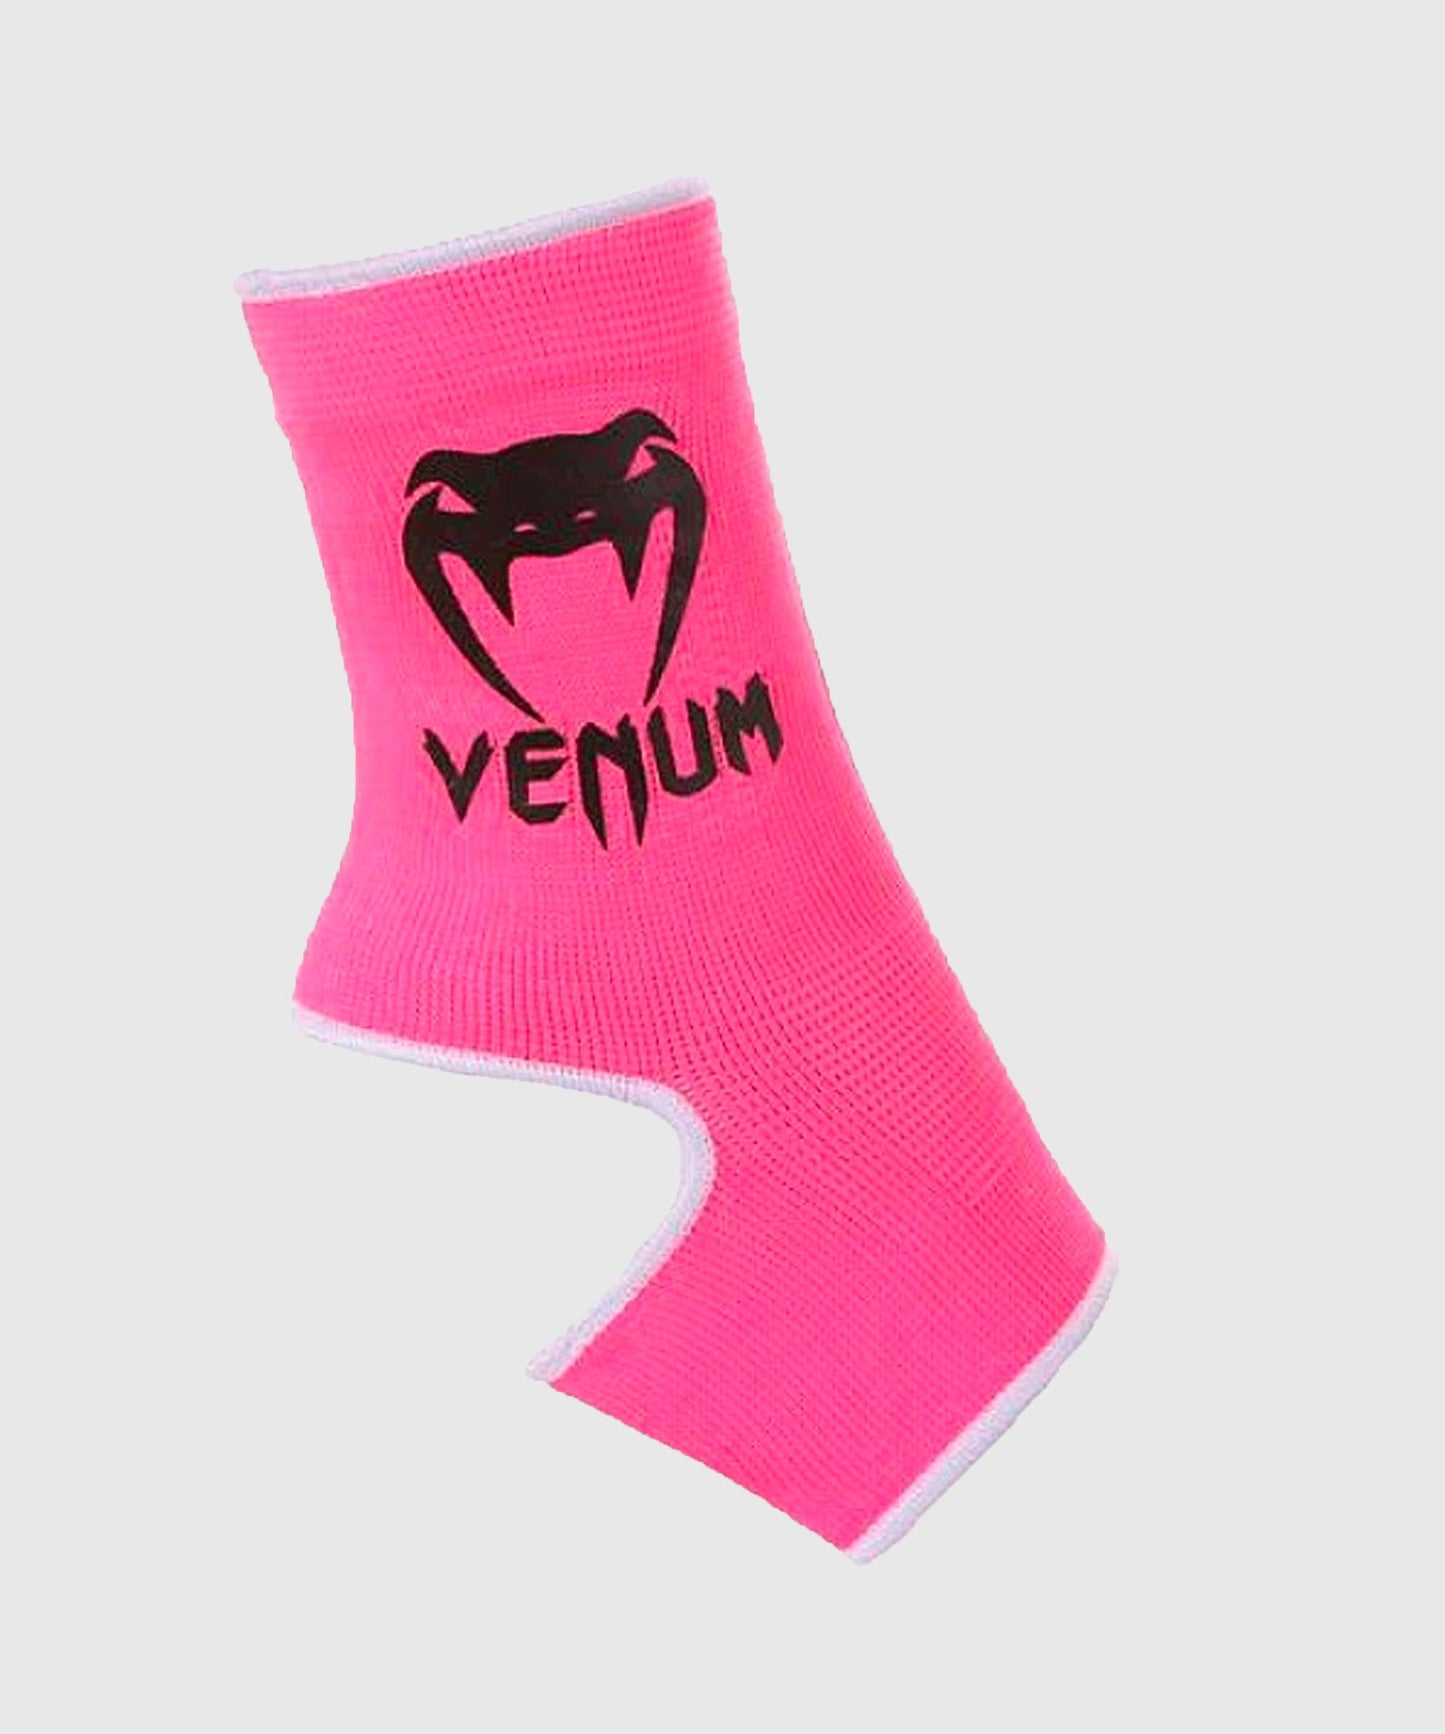 Venum Kontact Ankle Support Guard